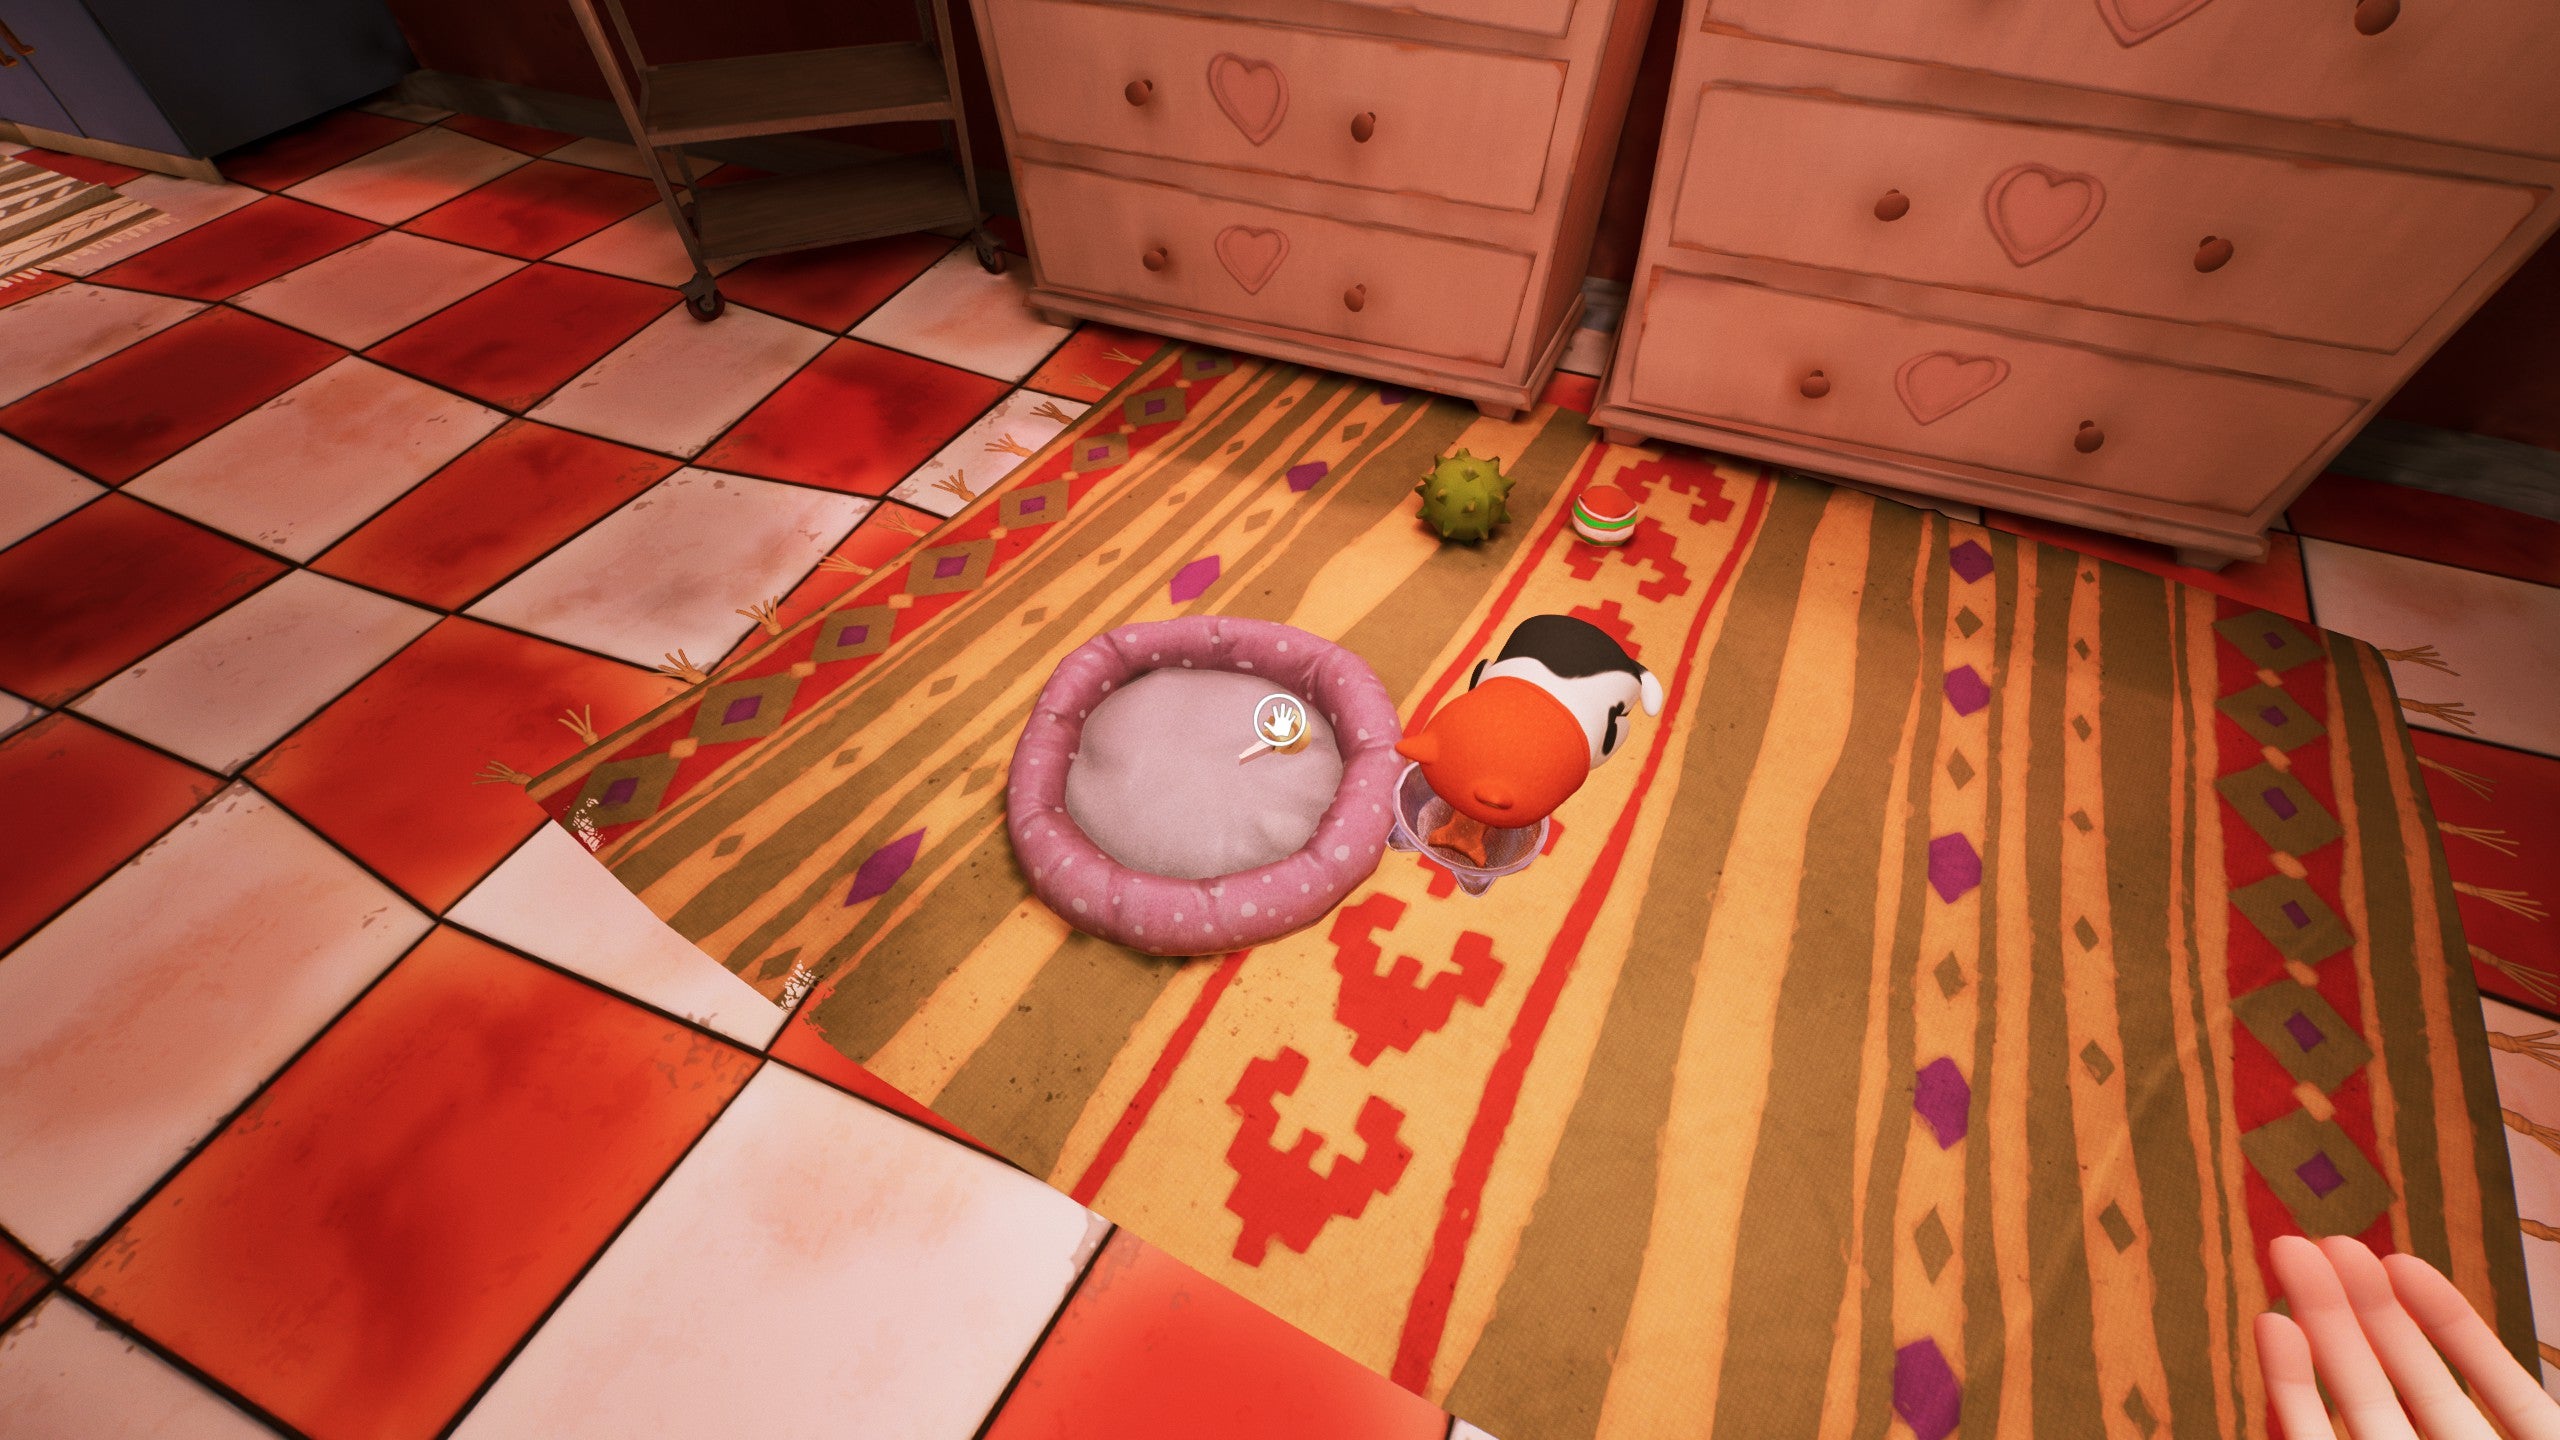 One of the missing cash register keys in the cat's bed in Hello Neighbor 2